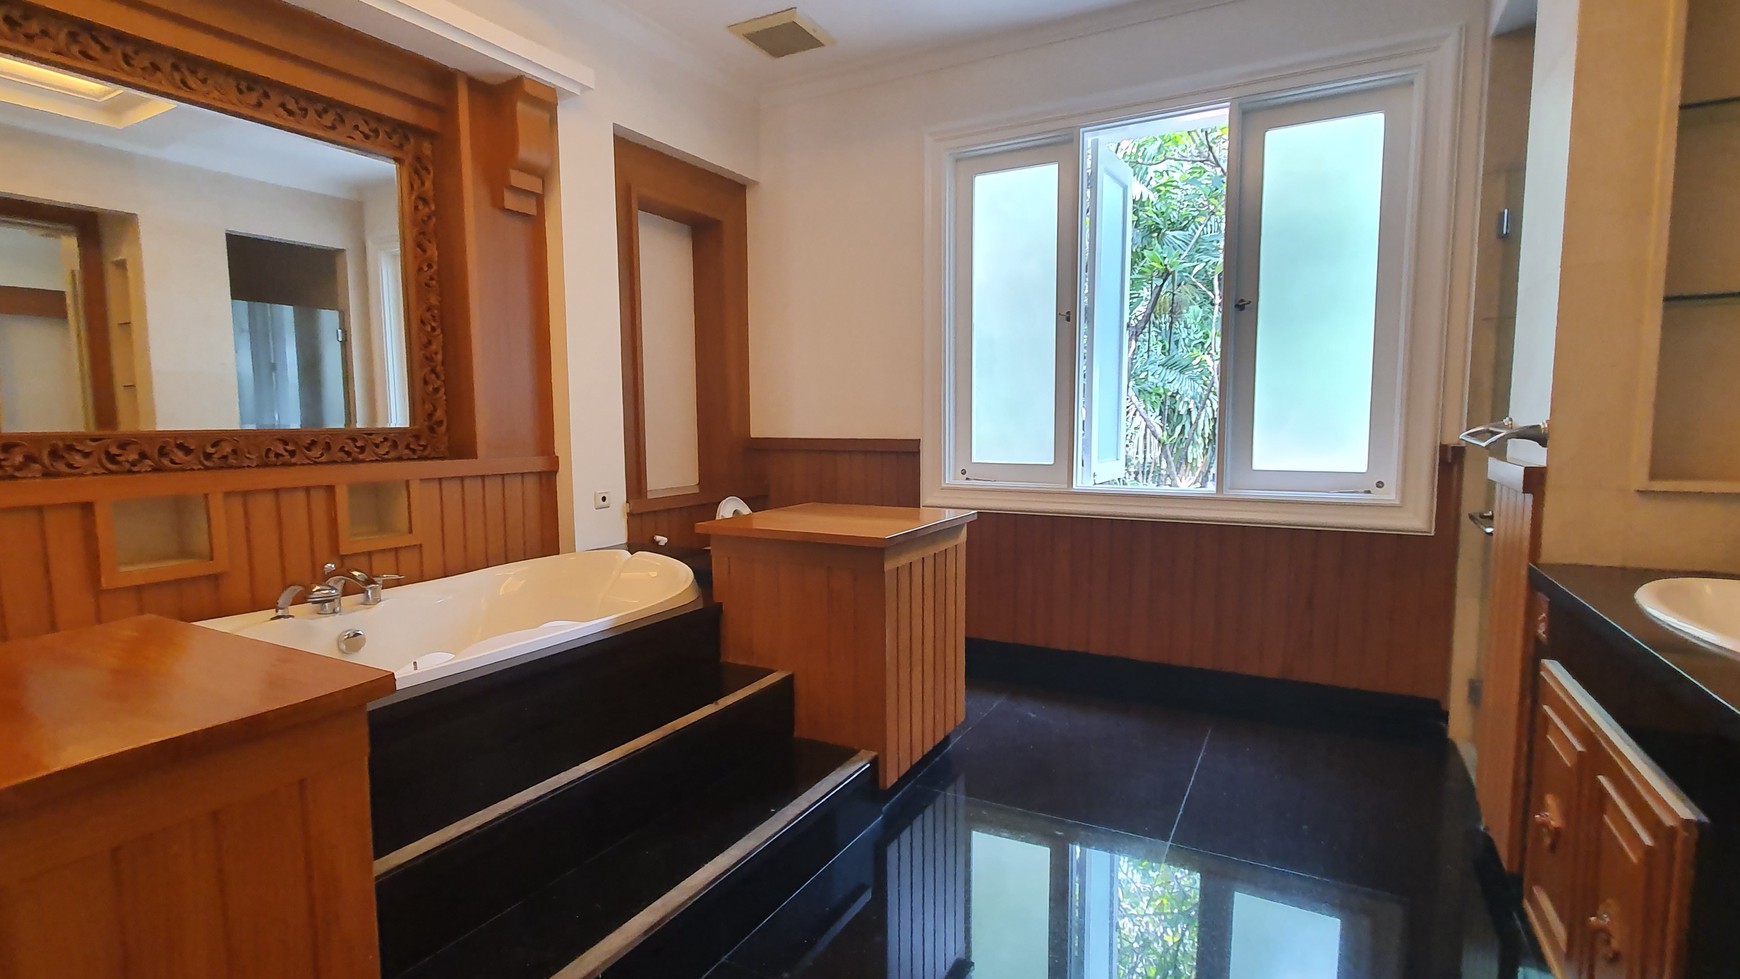 House for rent in Brawijaya area "Limitted Edition".